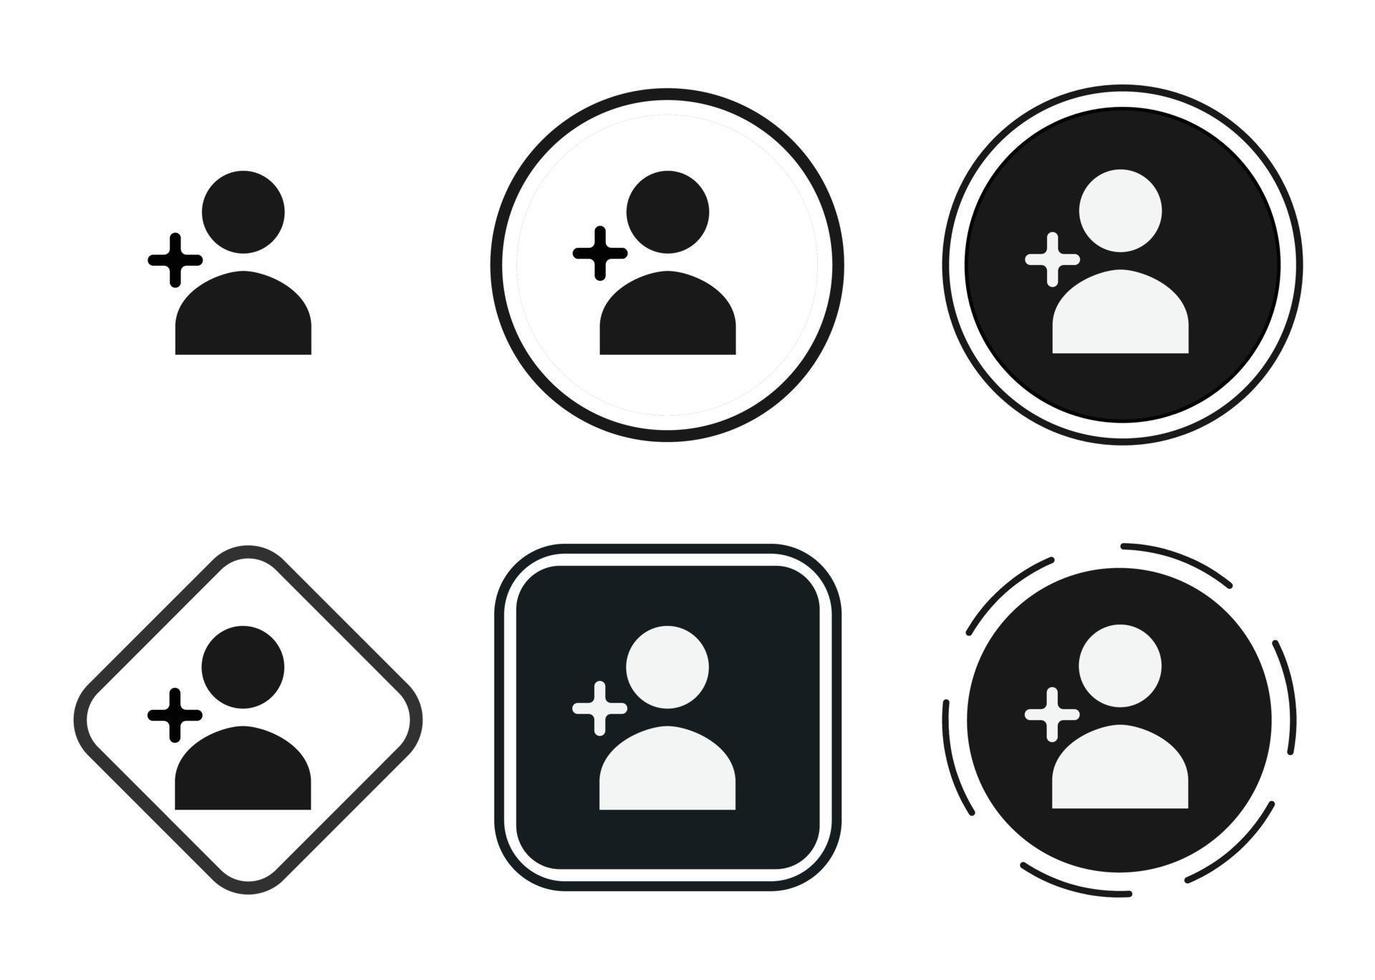 person add icon . web icon set . icons collection flat. Simple vector illustration.